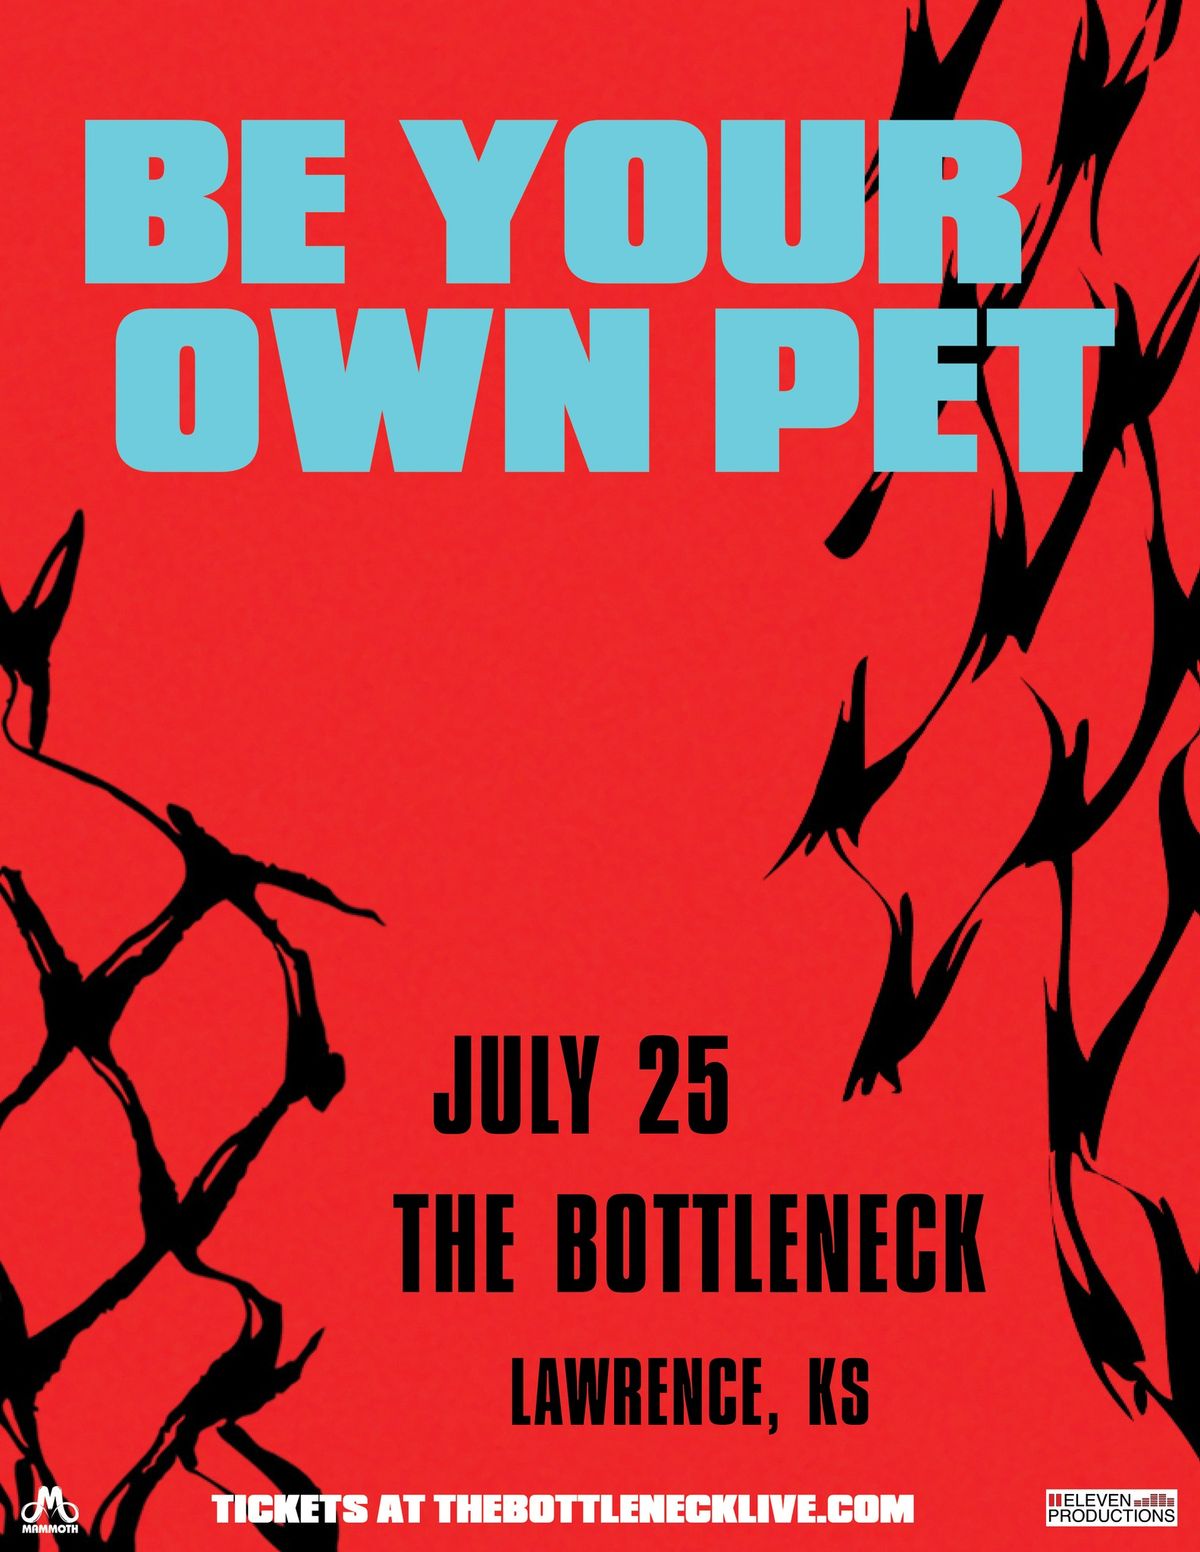 Be Your Own Pet at The Bottleneck